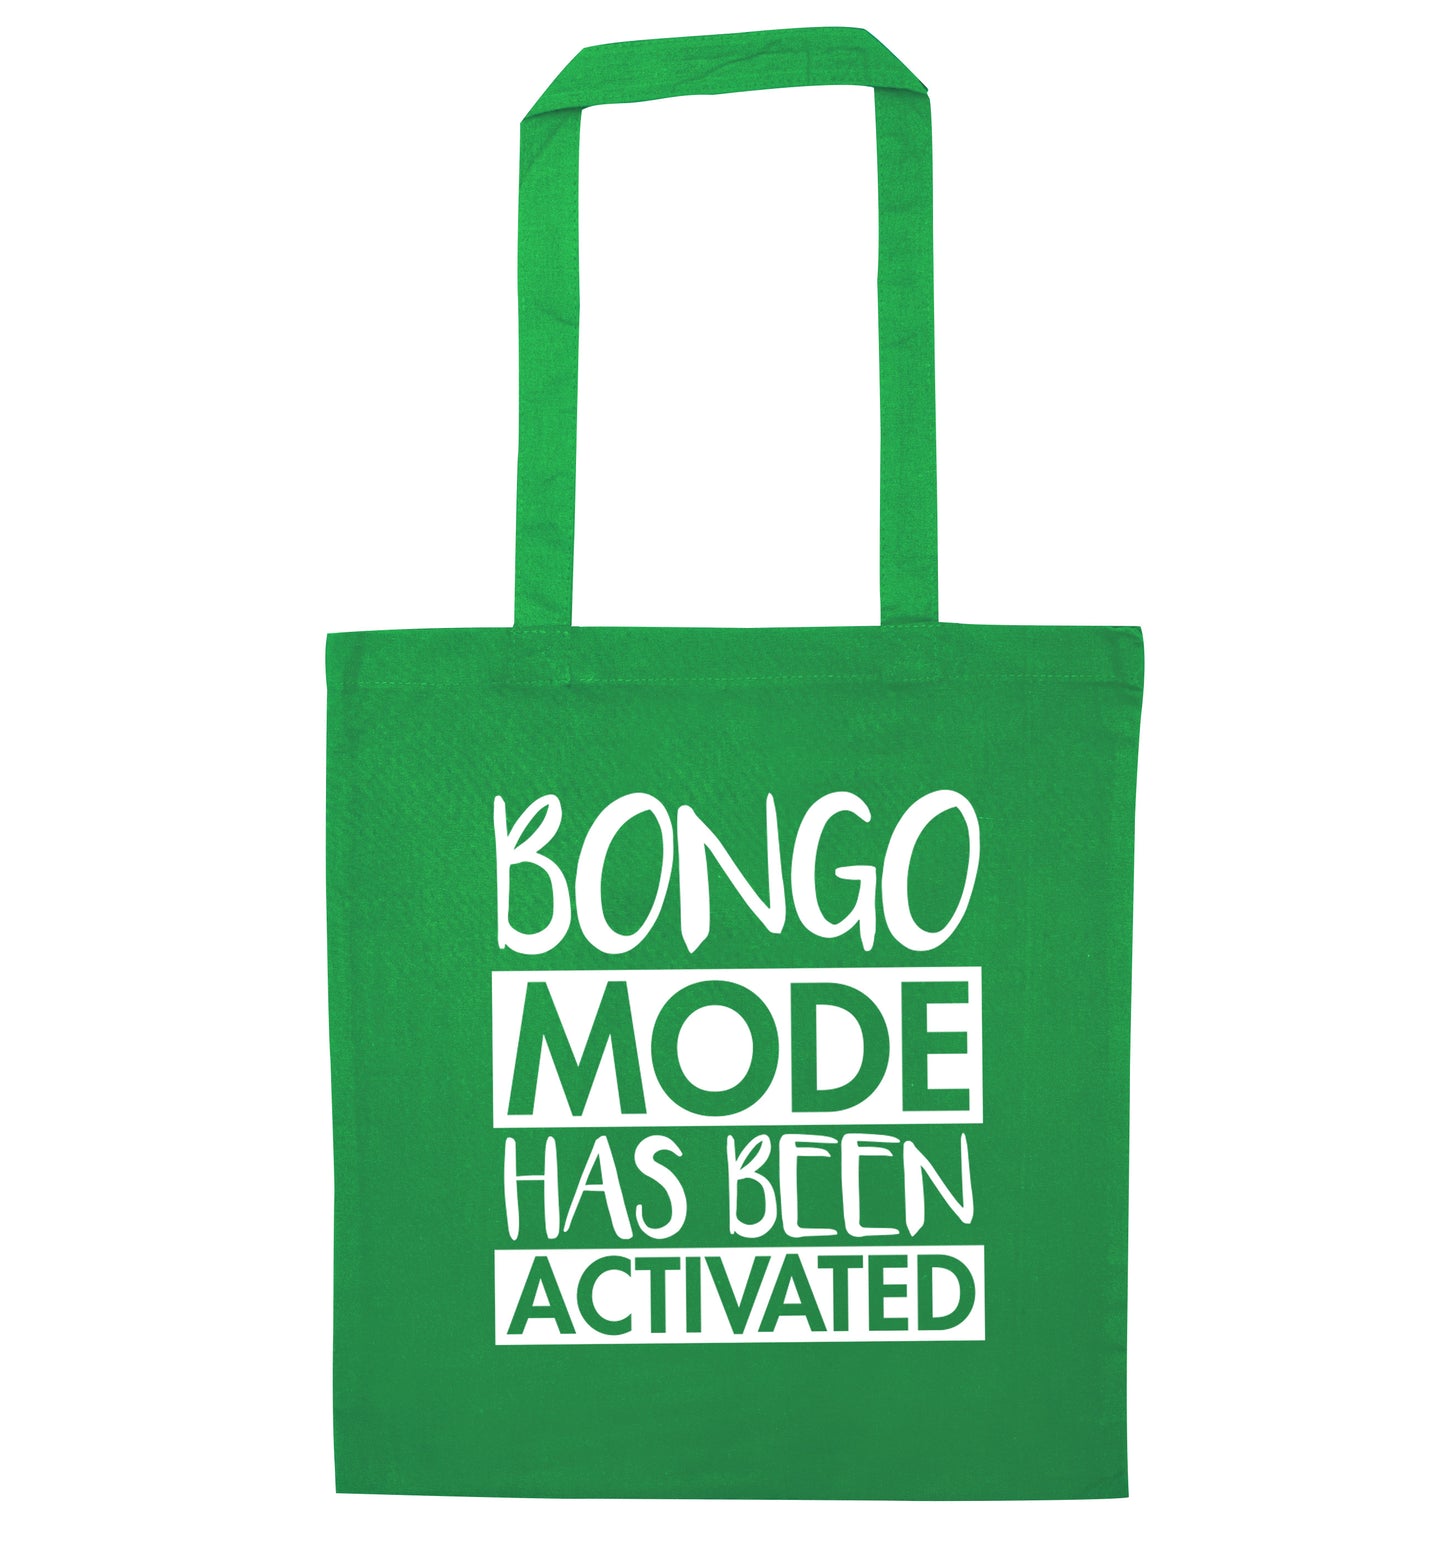 Bongo mode has been activated green tote bag